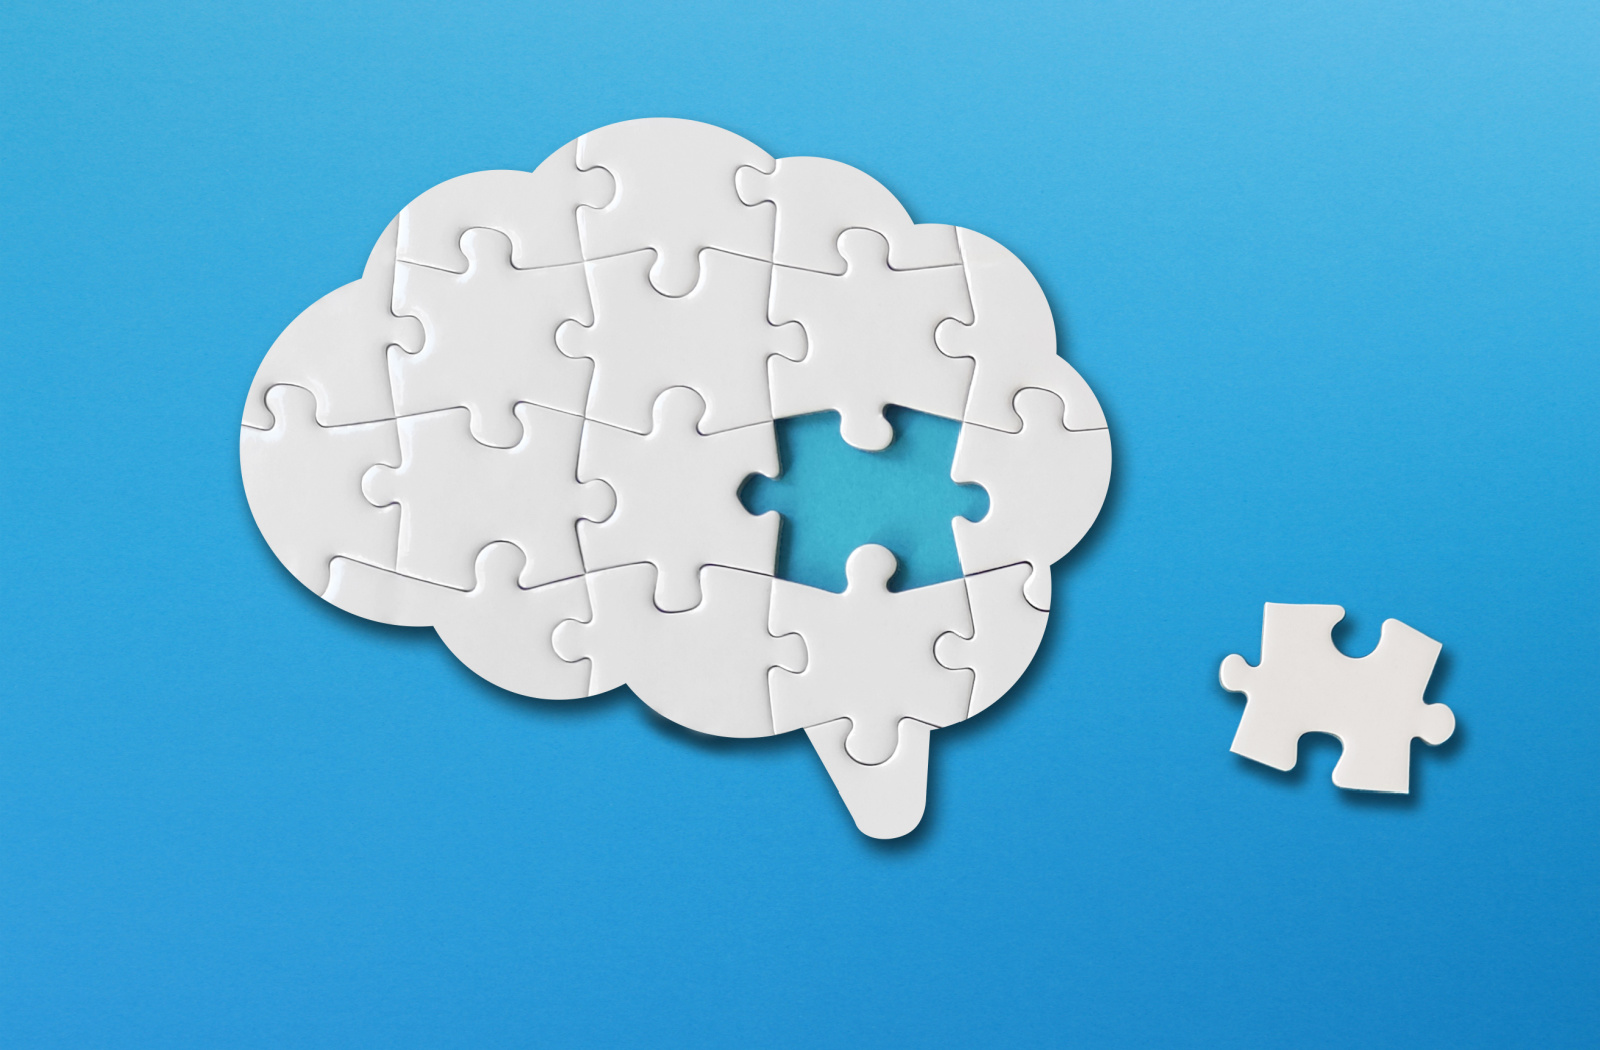 Brain assembled out of white puzzle pieces against a blue background.